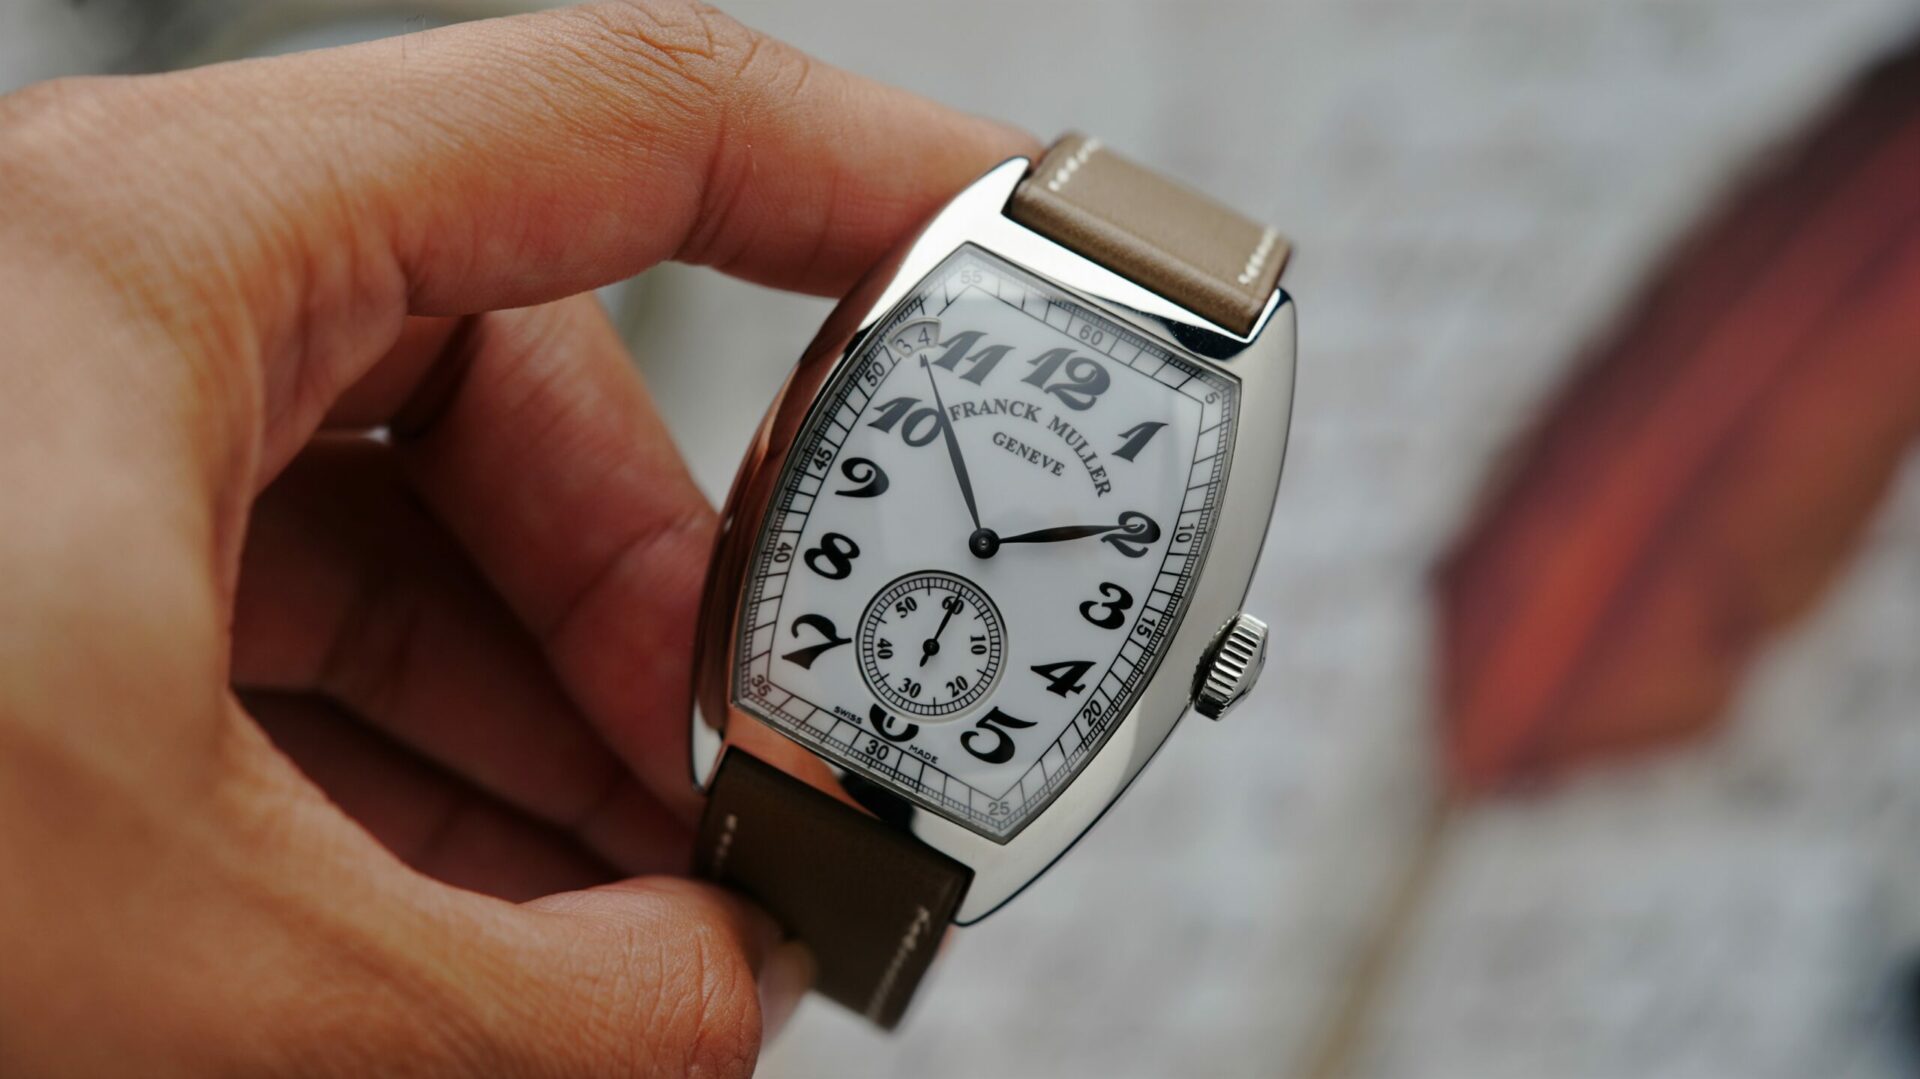 Franck Muller Vintage Curvex 7 Day Reserve watch being held in hand.